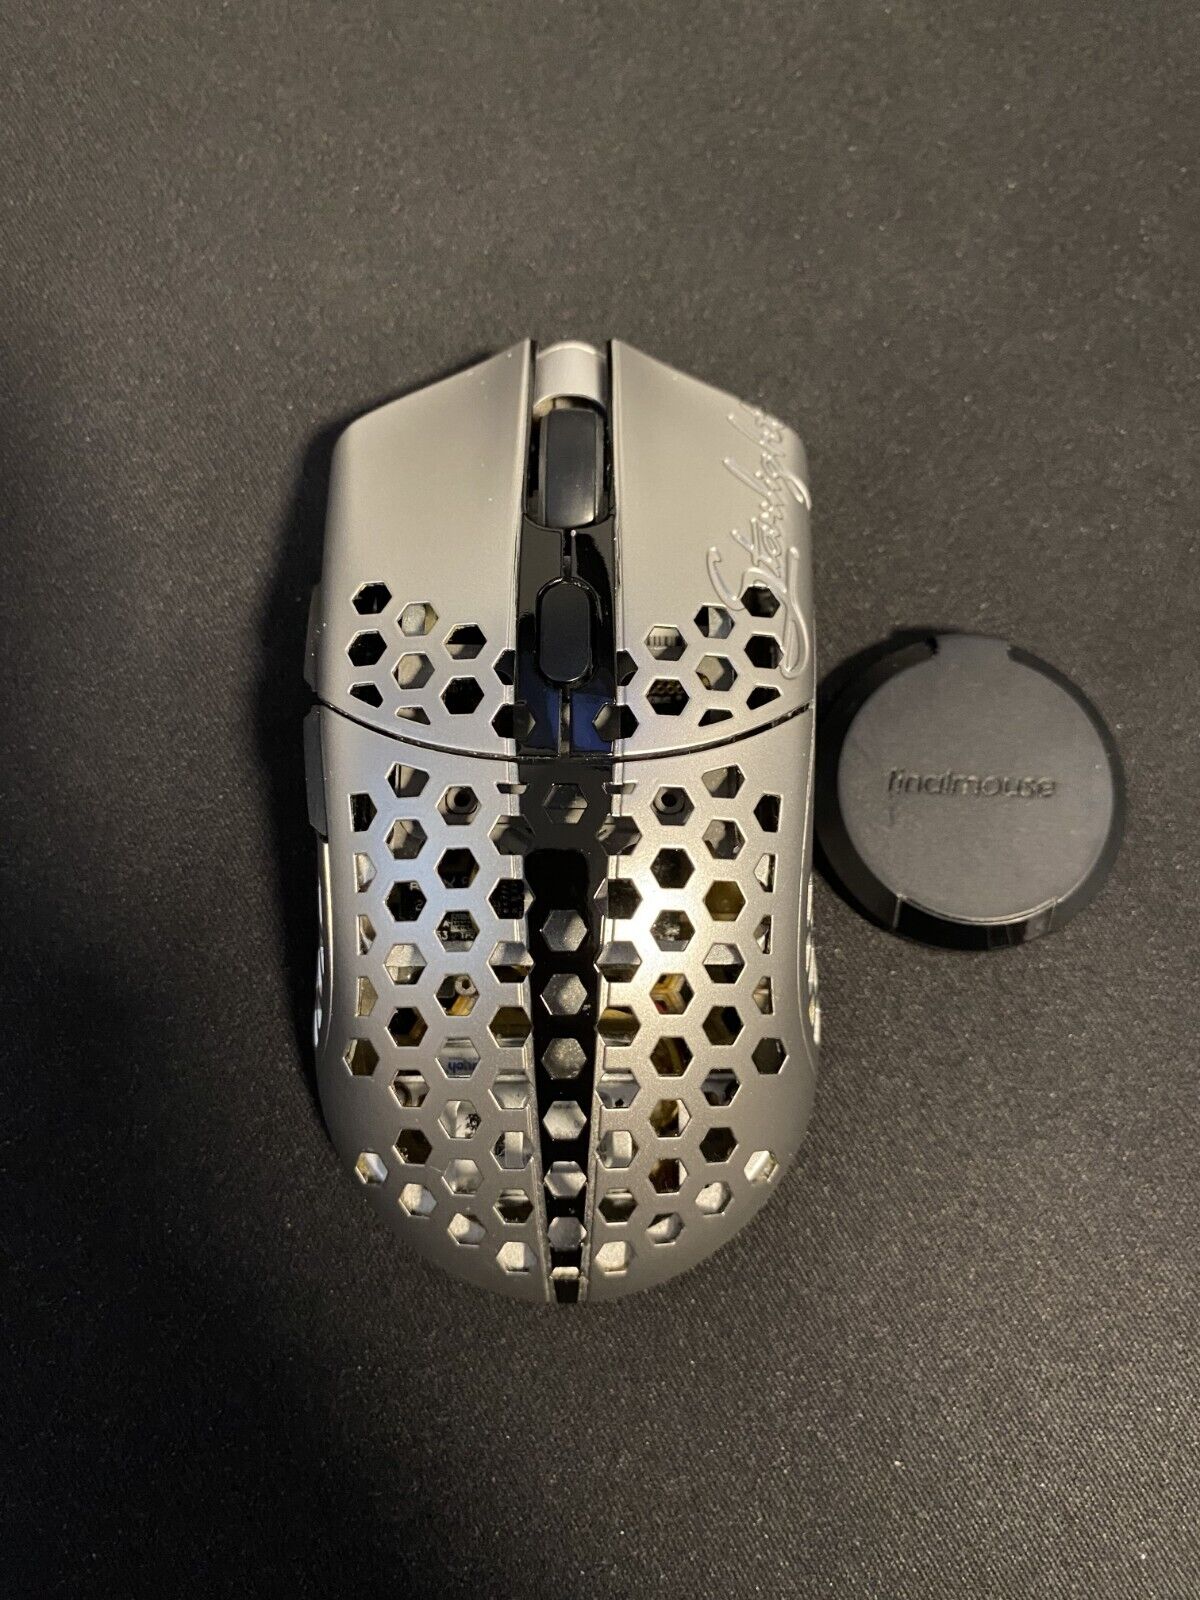 Finalmouse Starlight Pro TenZ Gaming Mouse MEDIUM